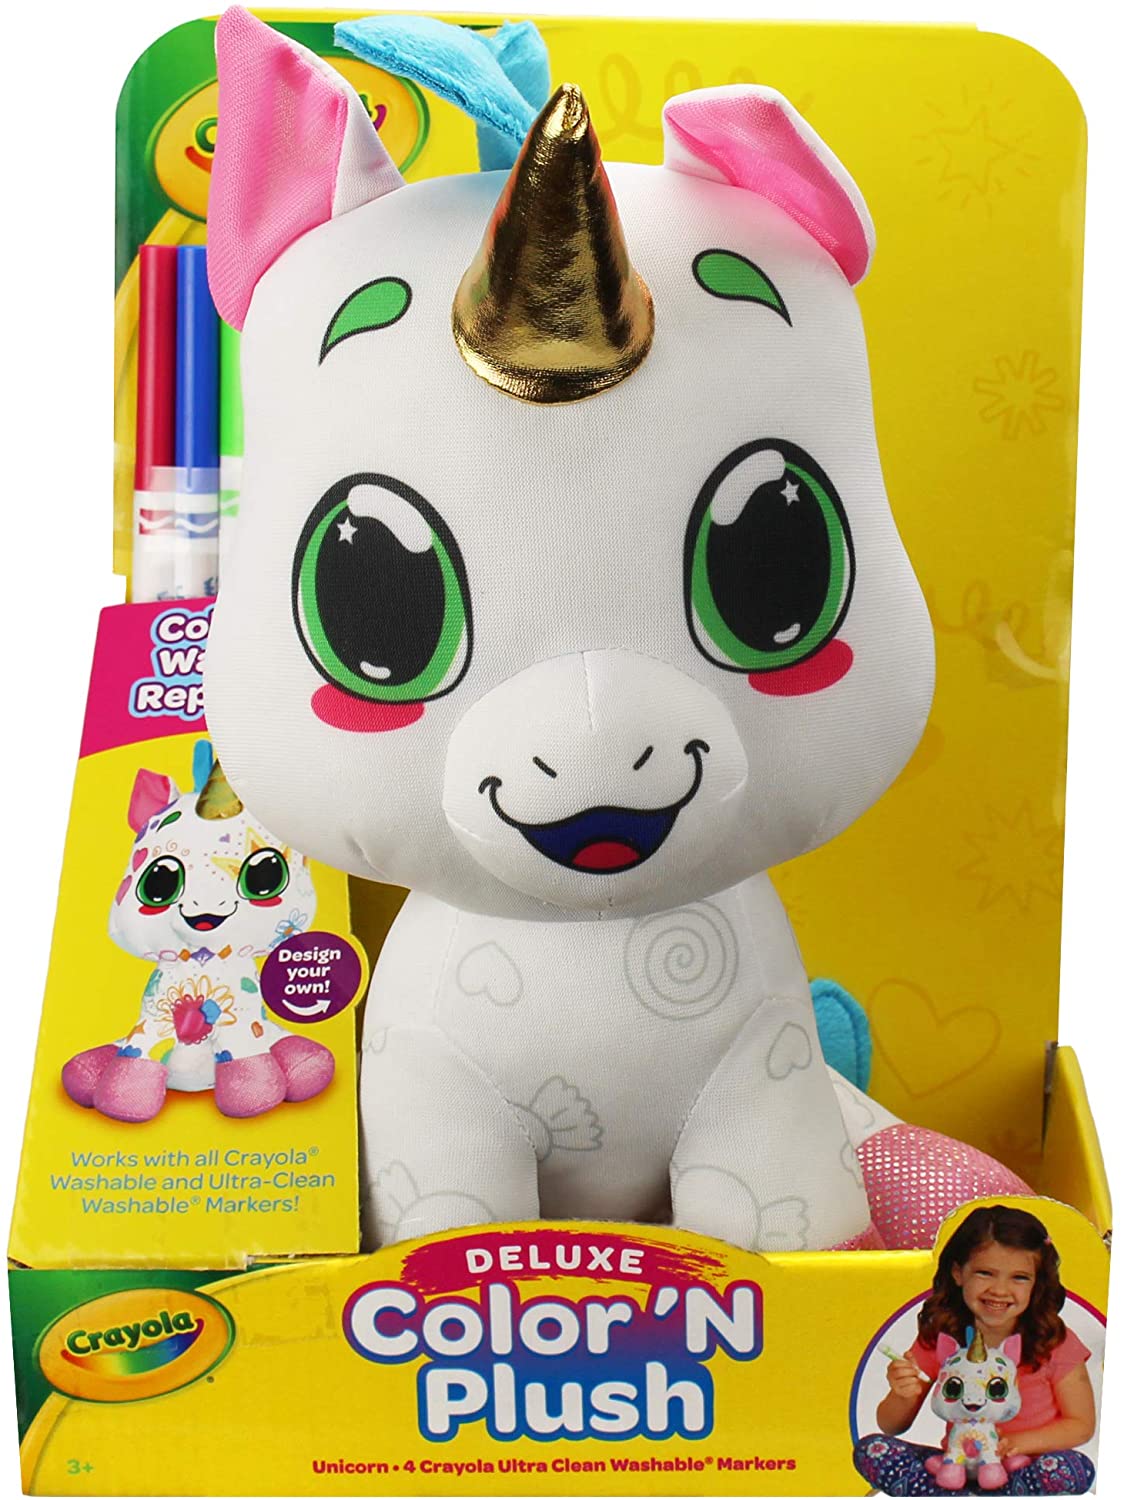 Crayola 17108 Deluxe Color 'N Plush - Unicorn Multi 12 inches - VIP Outlet